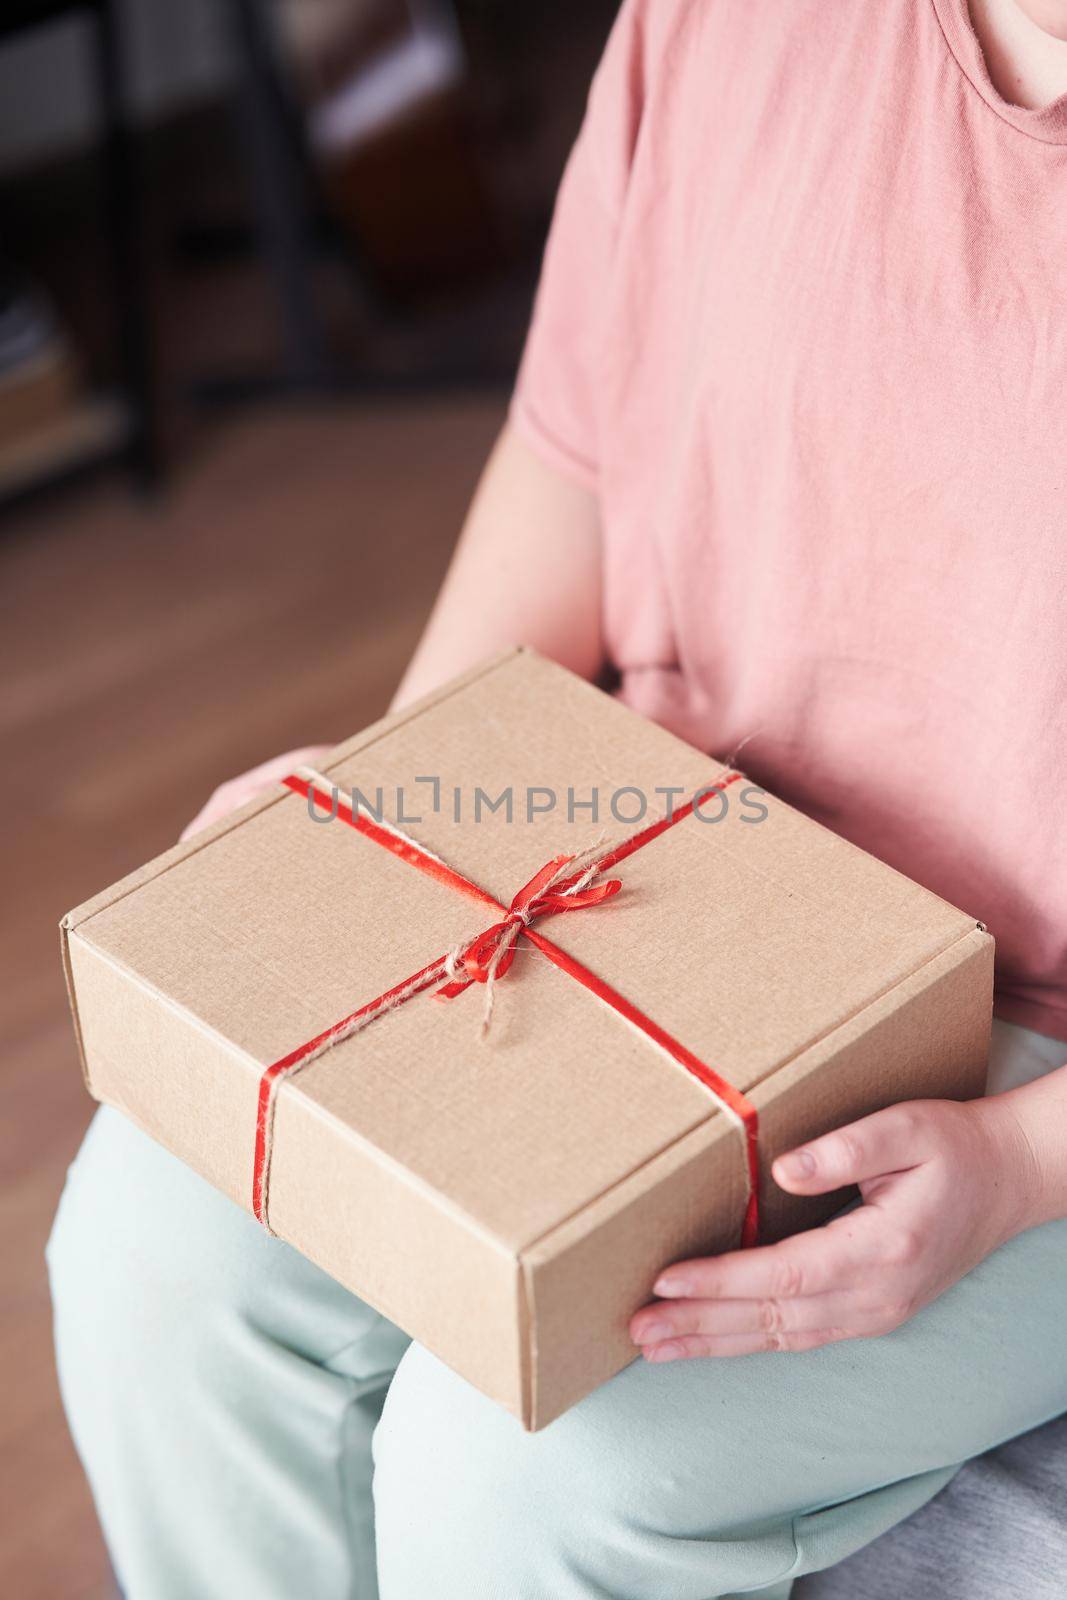 Selected focus. Girl holding a gift box with a red ribbon in her hands by driver-s